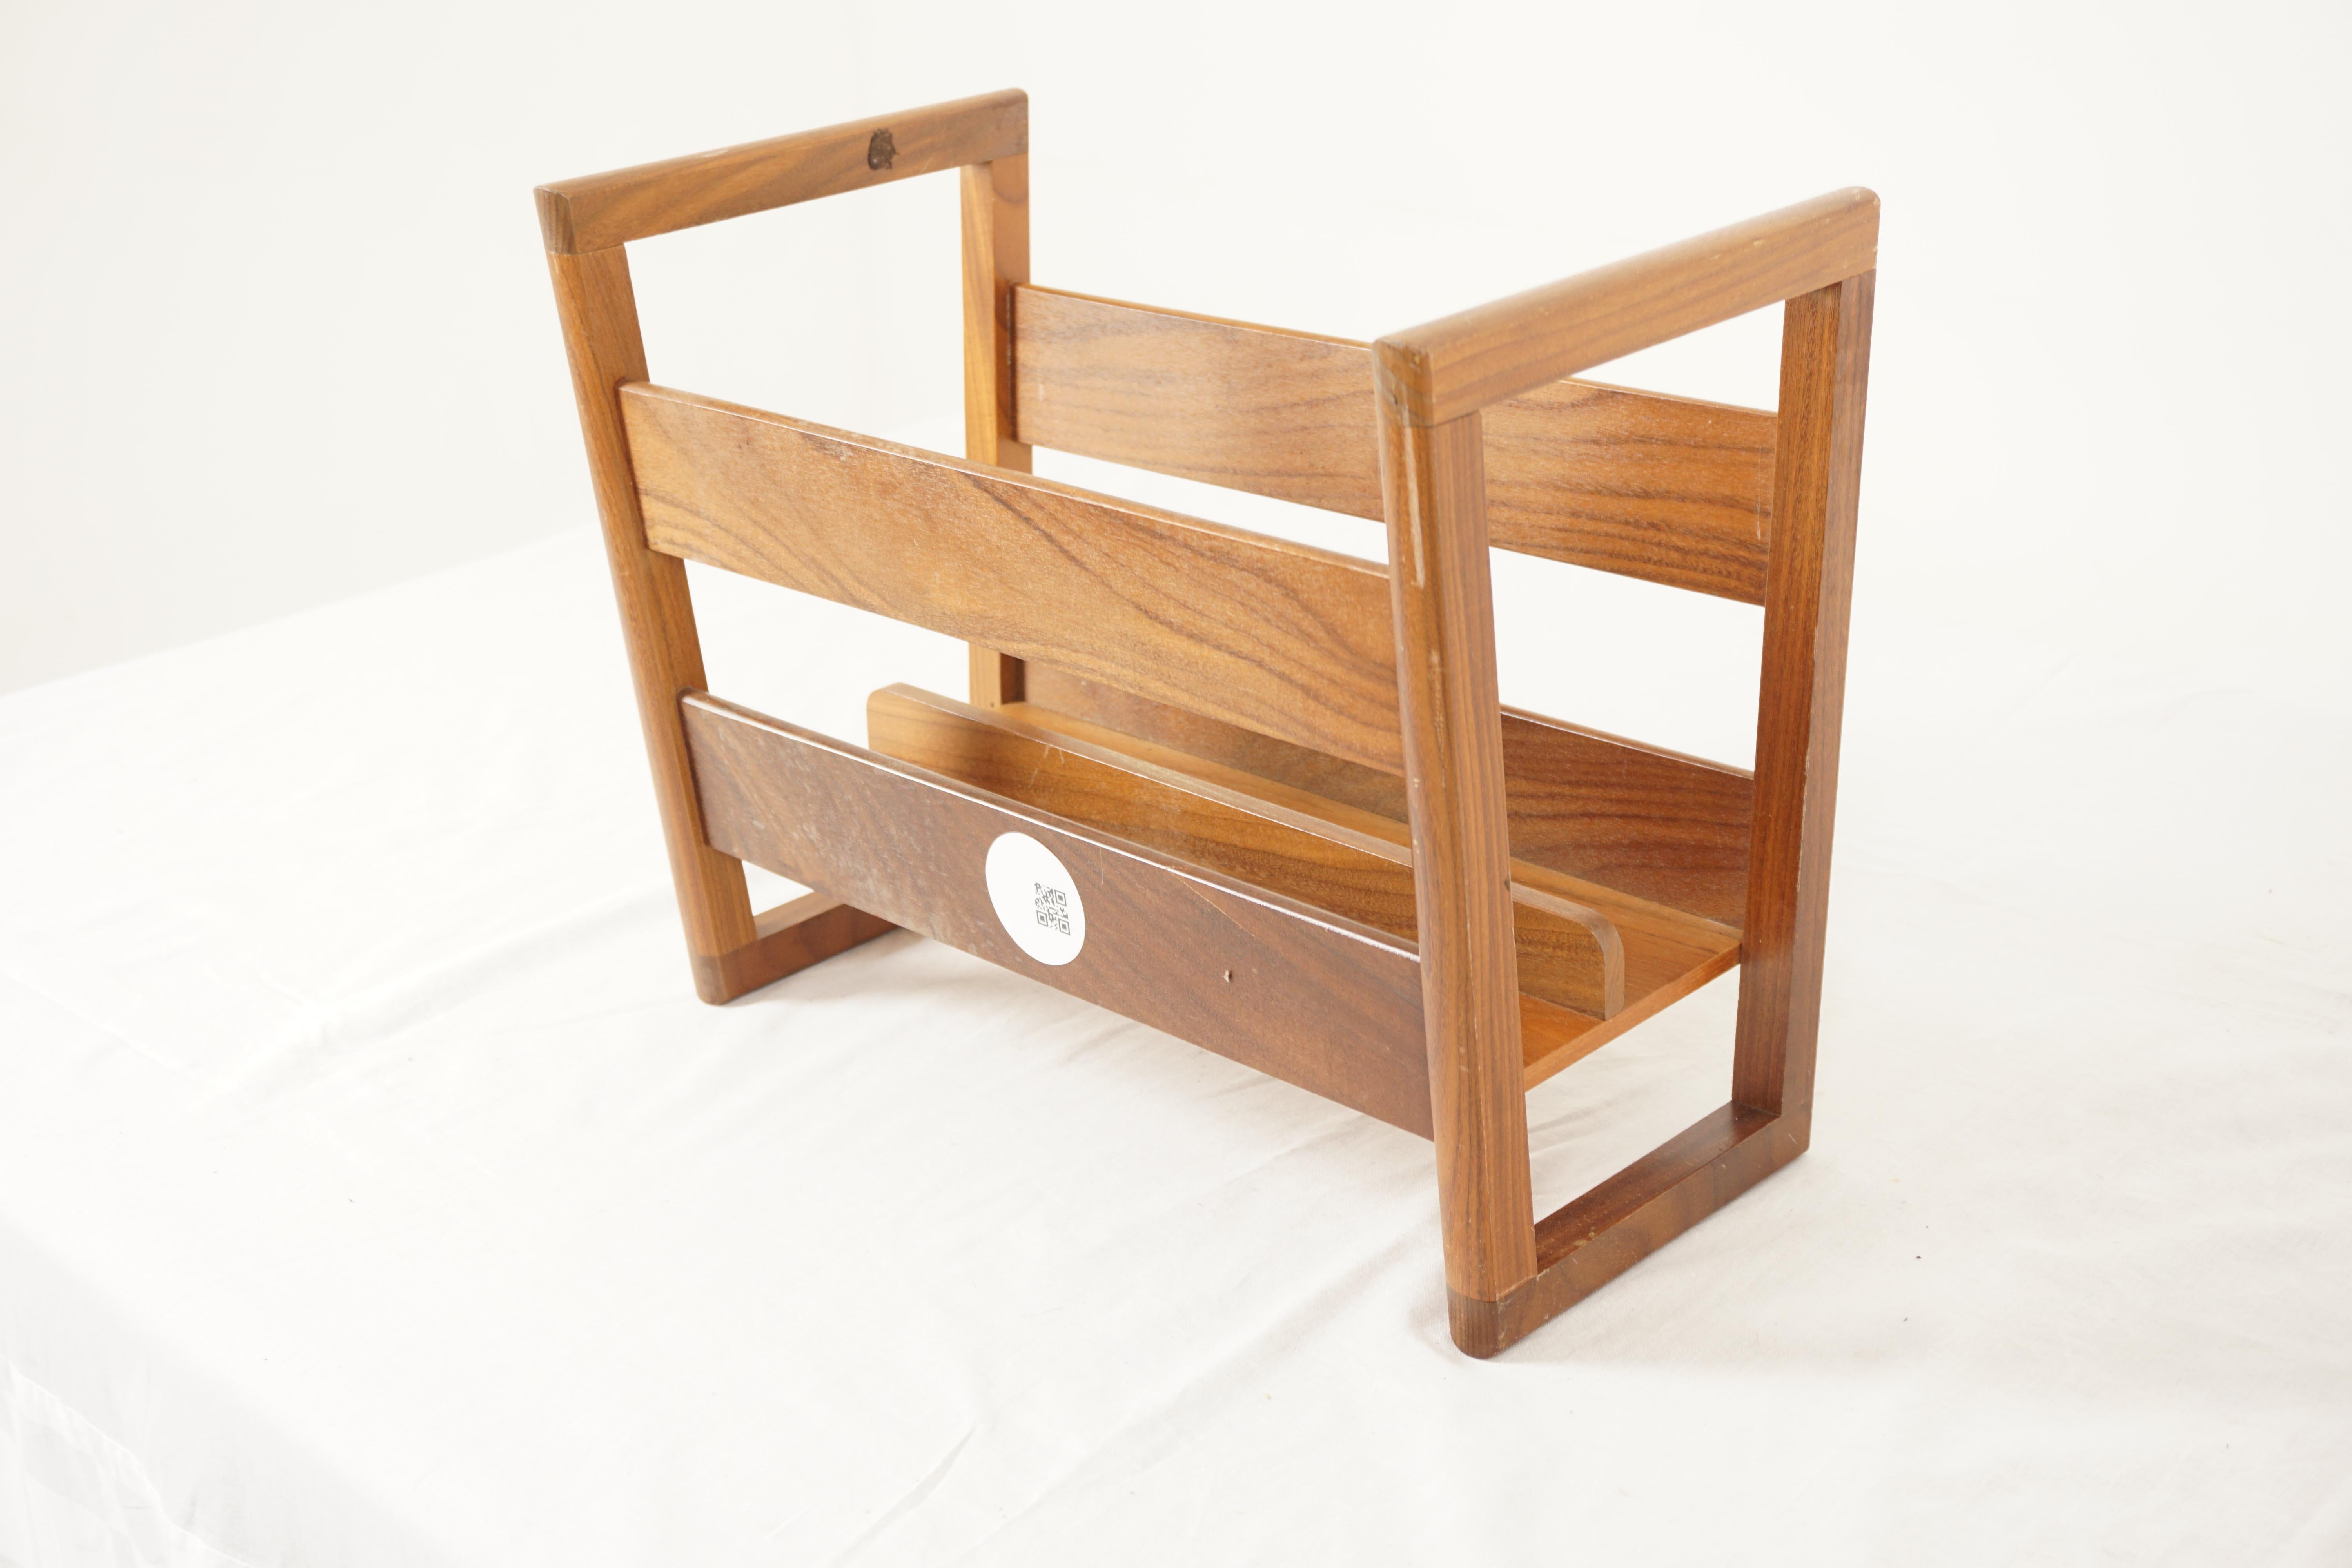 Midcentury Teak Magazine Rack, Modern Canterbury, Scotland 1950, H1102 

+ Scotland 1950
+ Solid Teak
+ Original Finish
+ Pair of solid teak supports
+ With two dividers for storing magazines
+ Nice quality and in good